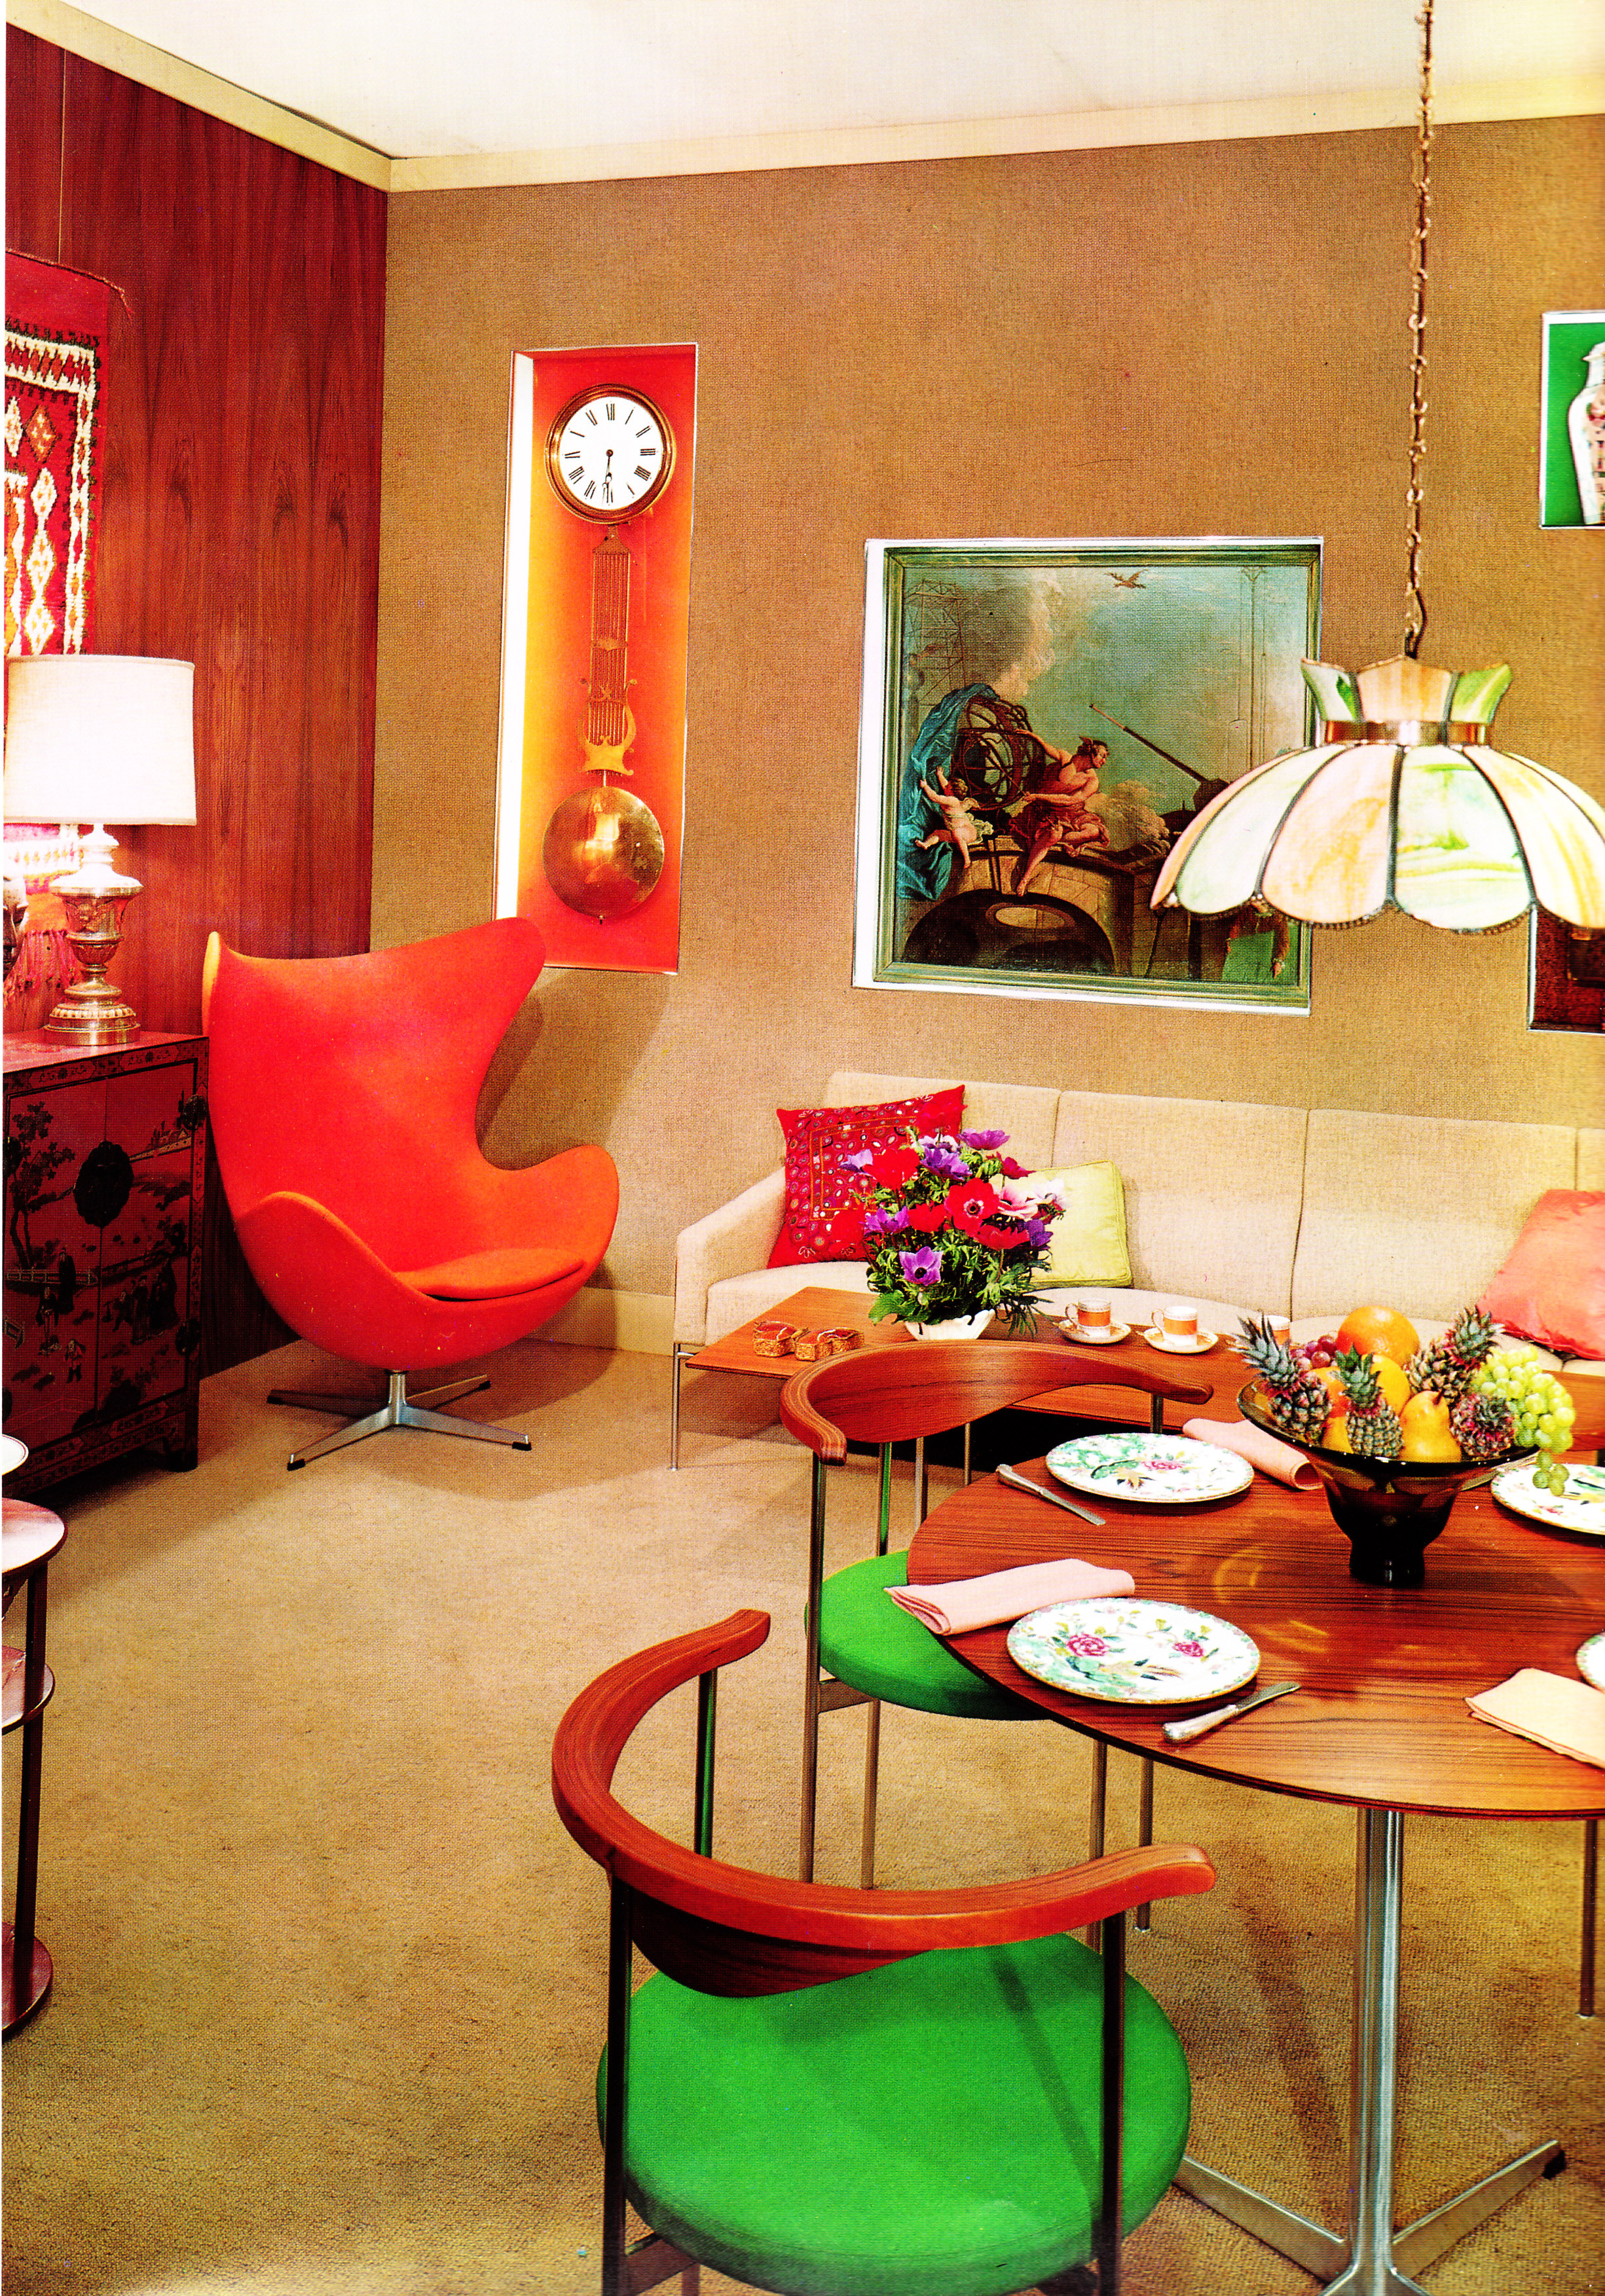 Home ’65: A Groovy Look at Mid-Sixties Interior Décor